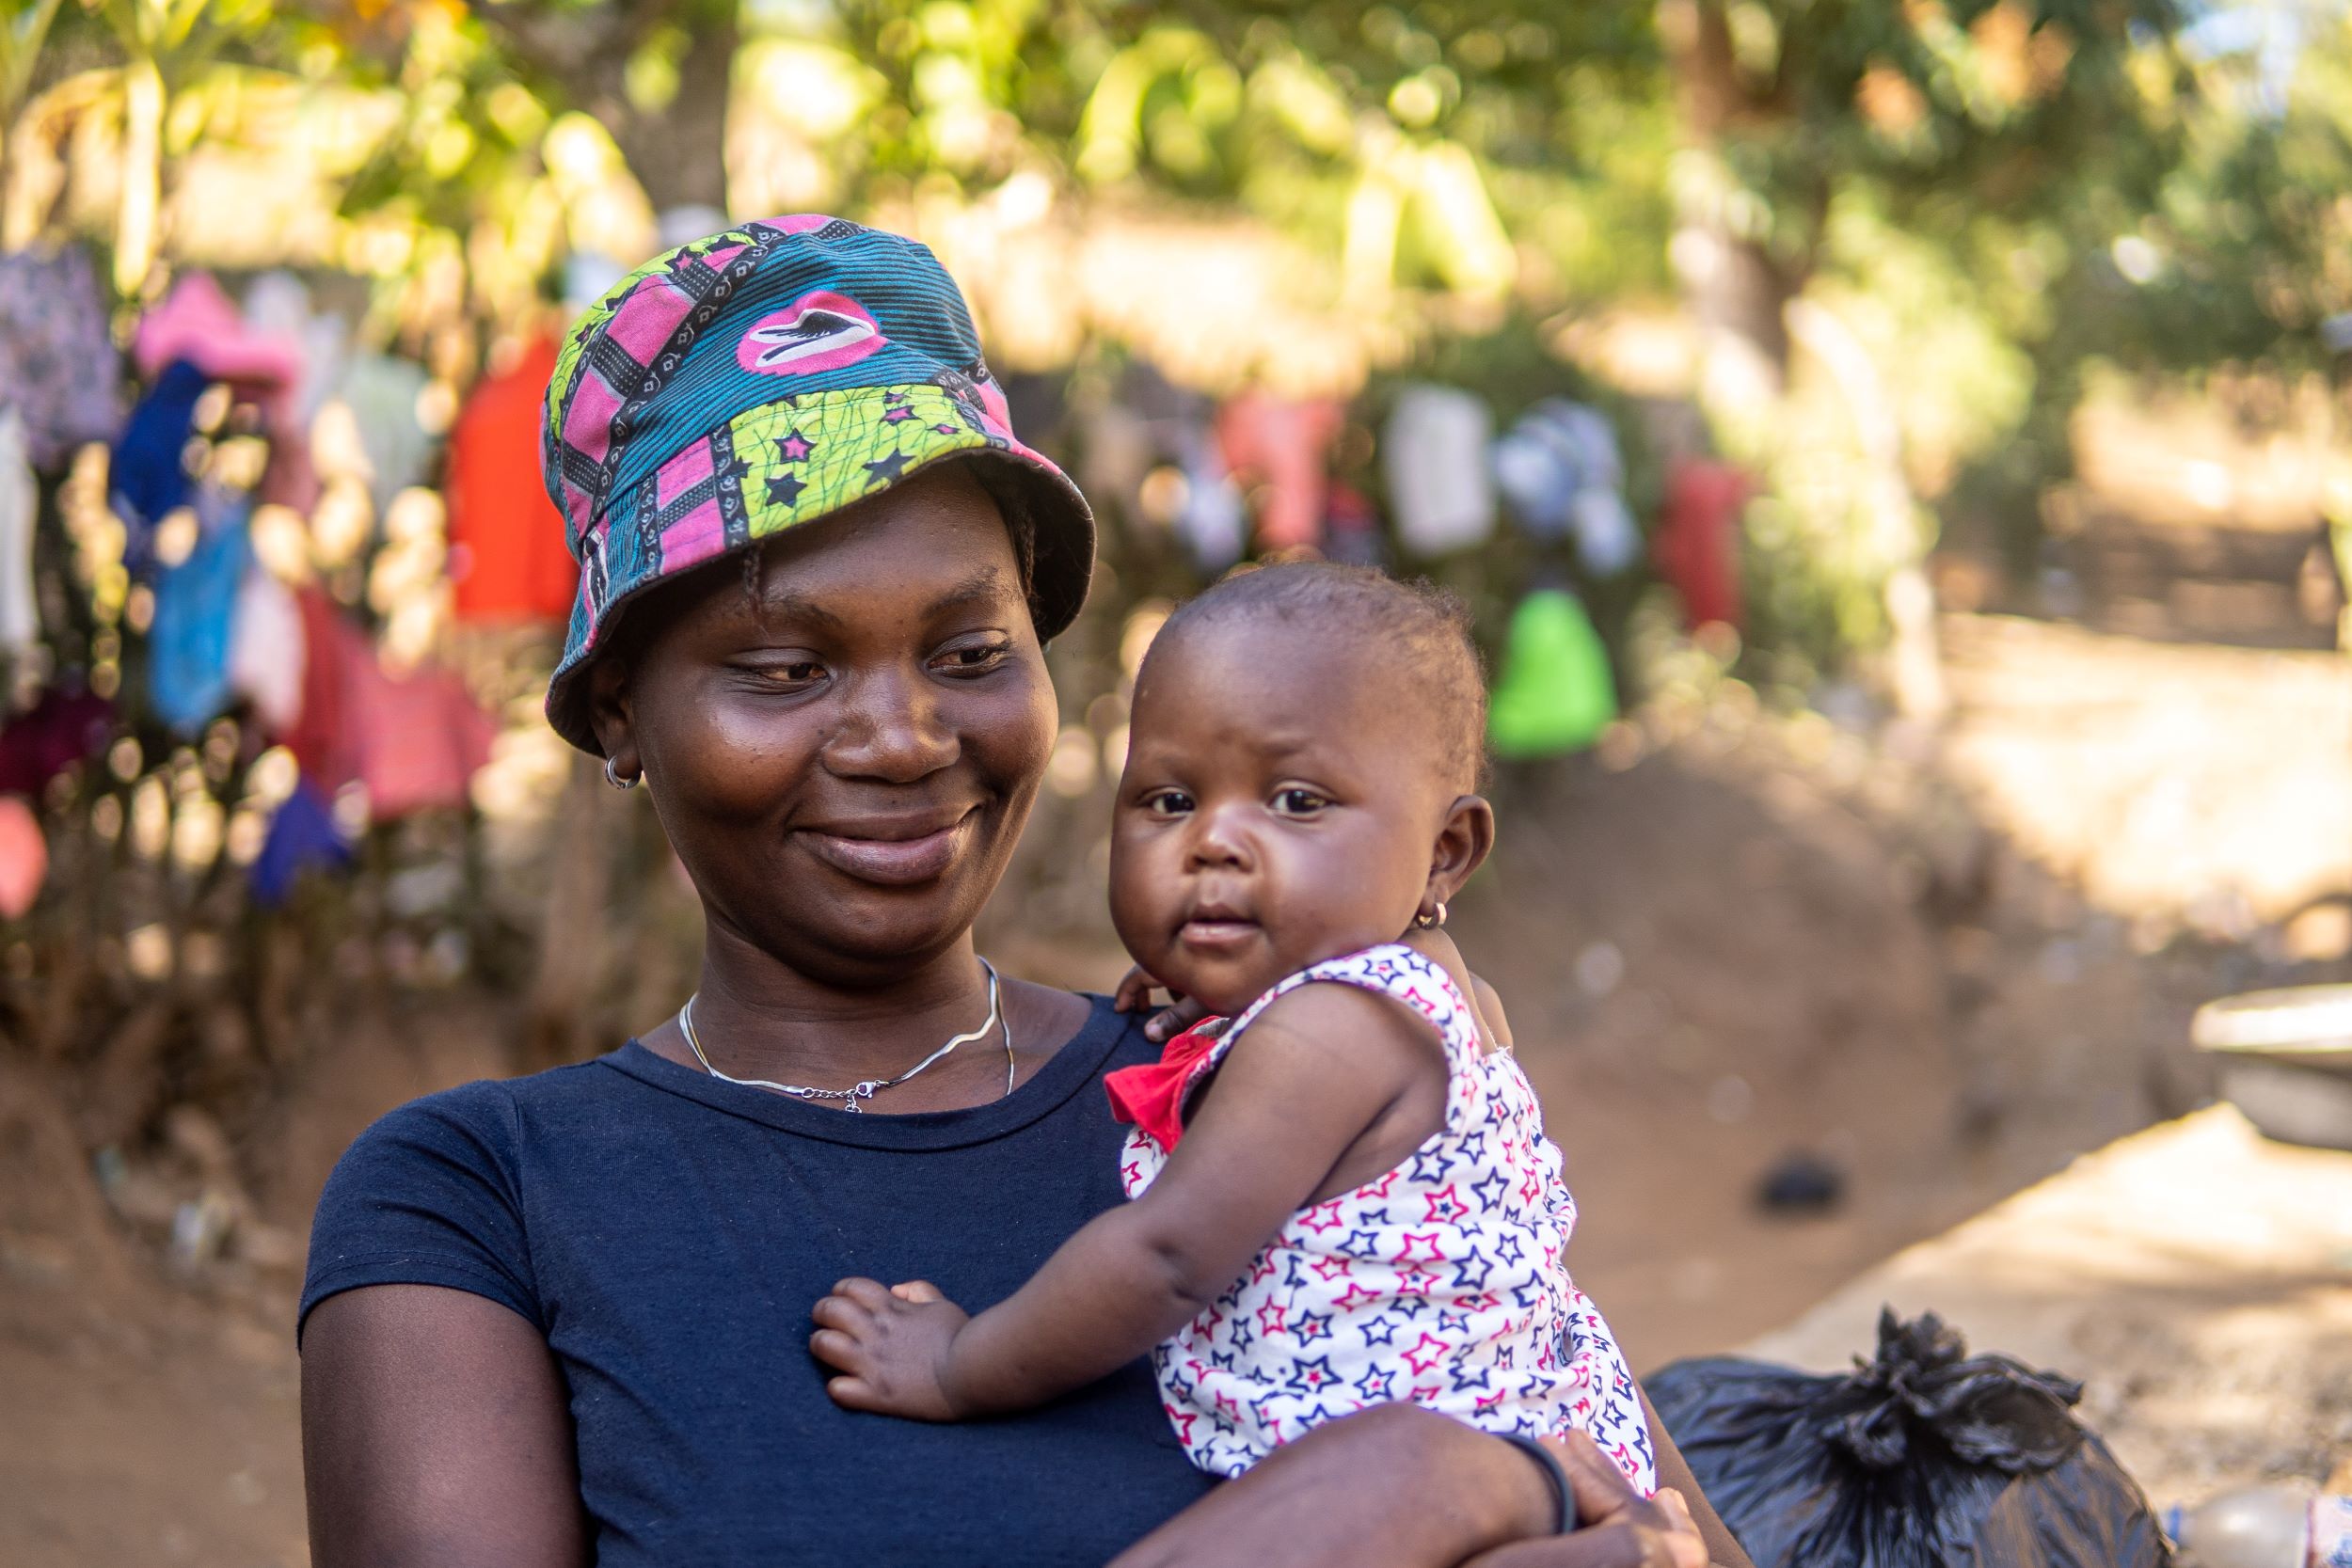 Haitian woman in blue t-shirt and hat smiling with baby girl in arms